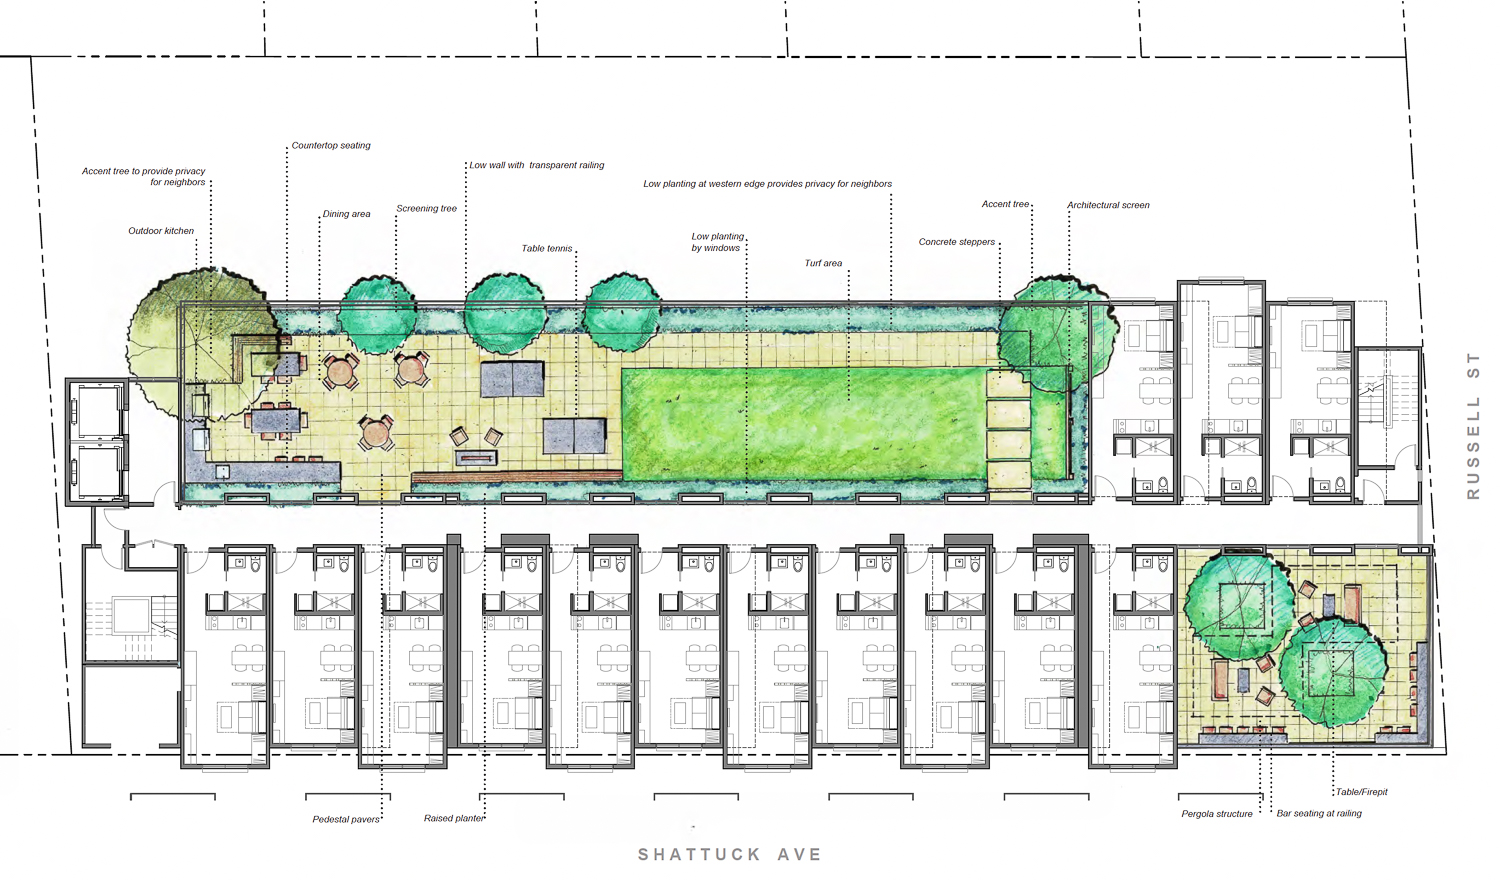 2900 Shattuck Avenue rooftop landscaping map, illustration by Inside Out Trachtenberg Architects